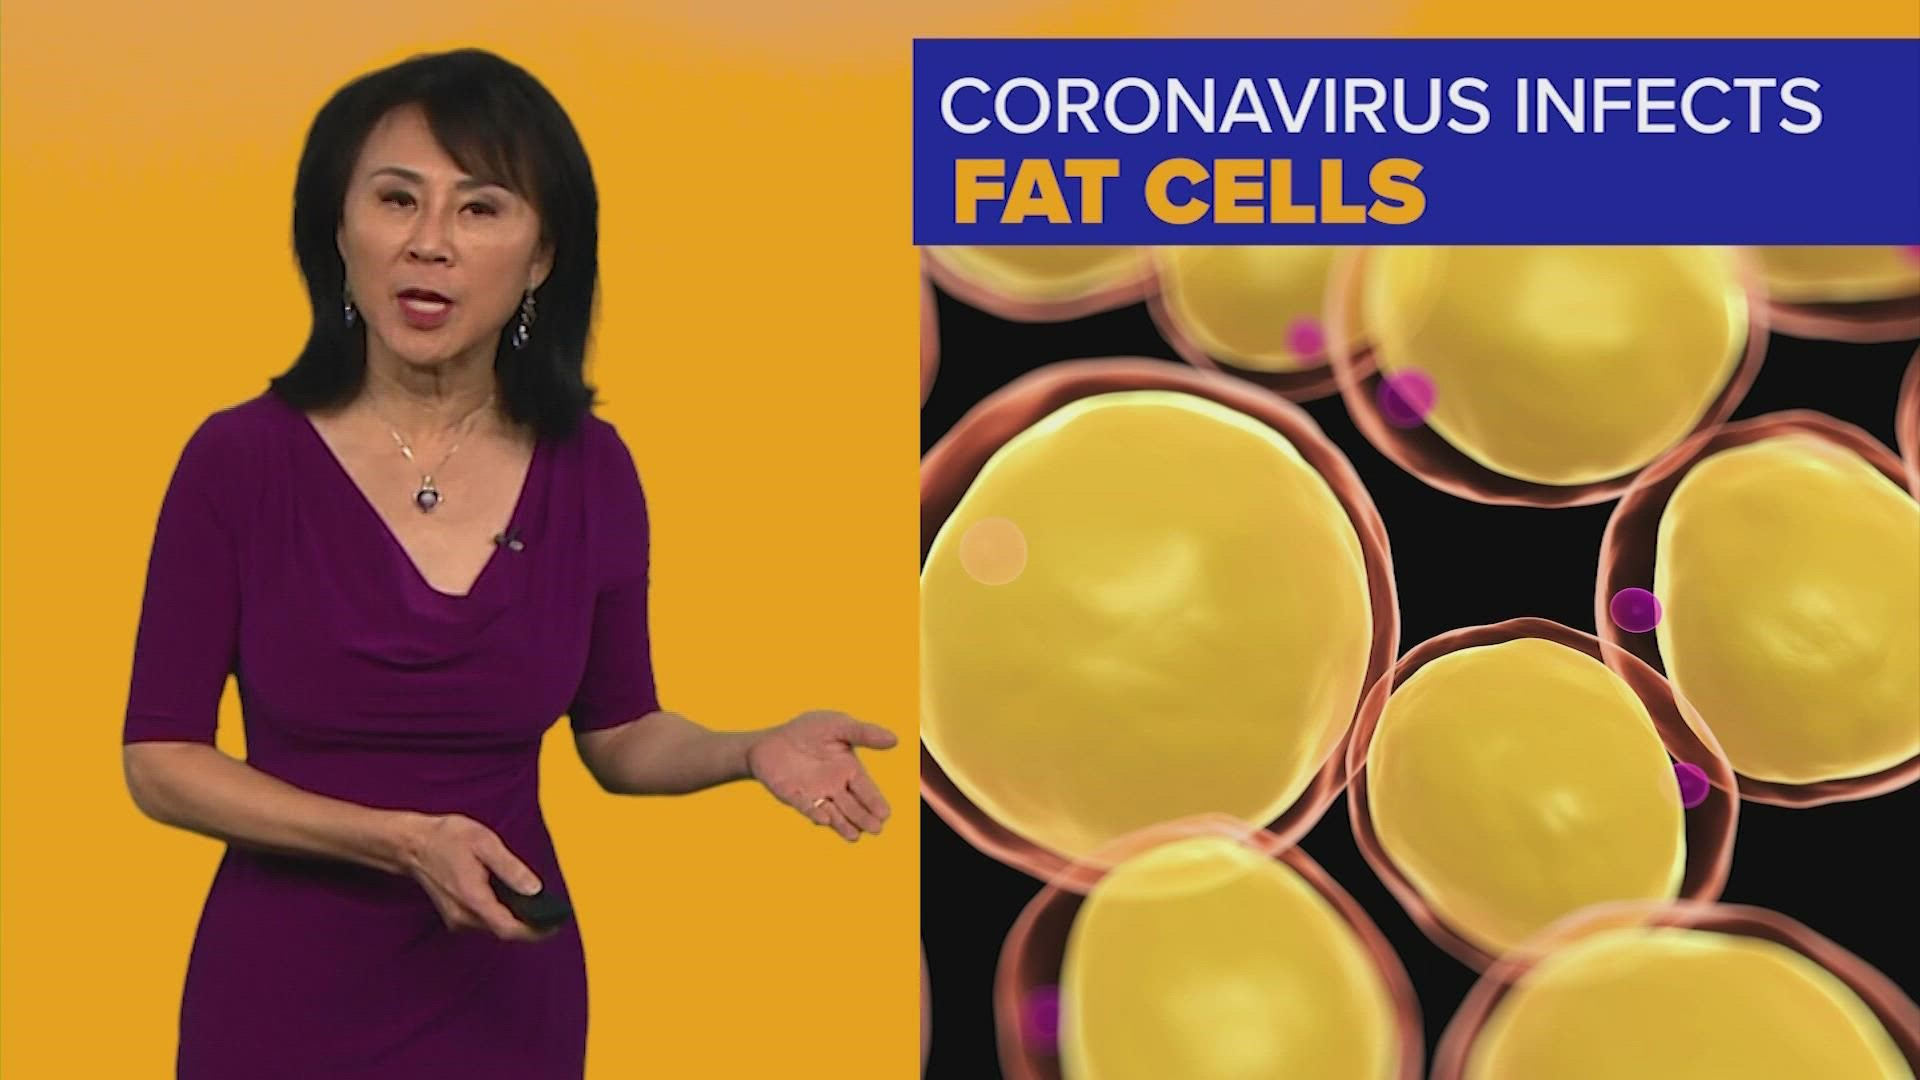 New research indicates fat could play an important role in COVID infections.